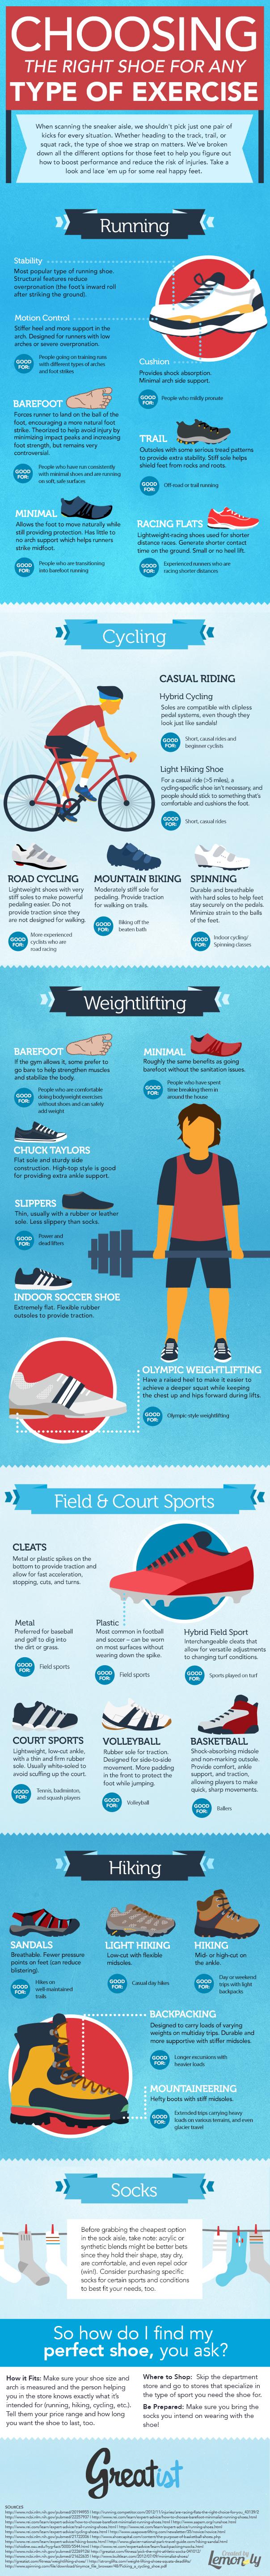 Greatist5_Fitness Shoes_FINAL-FINAL